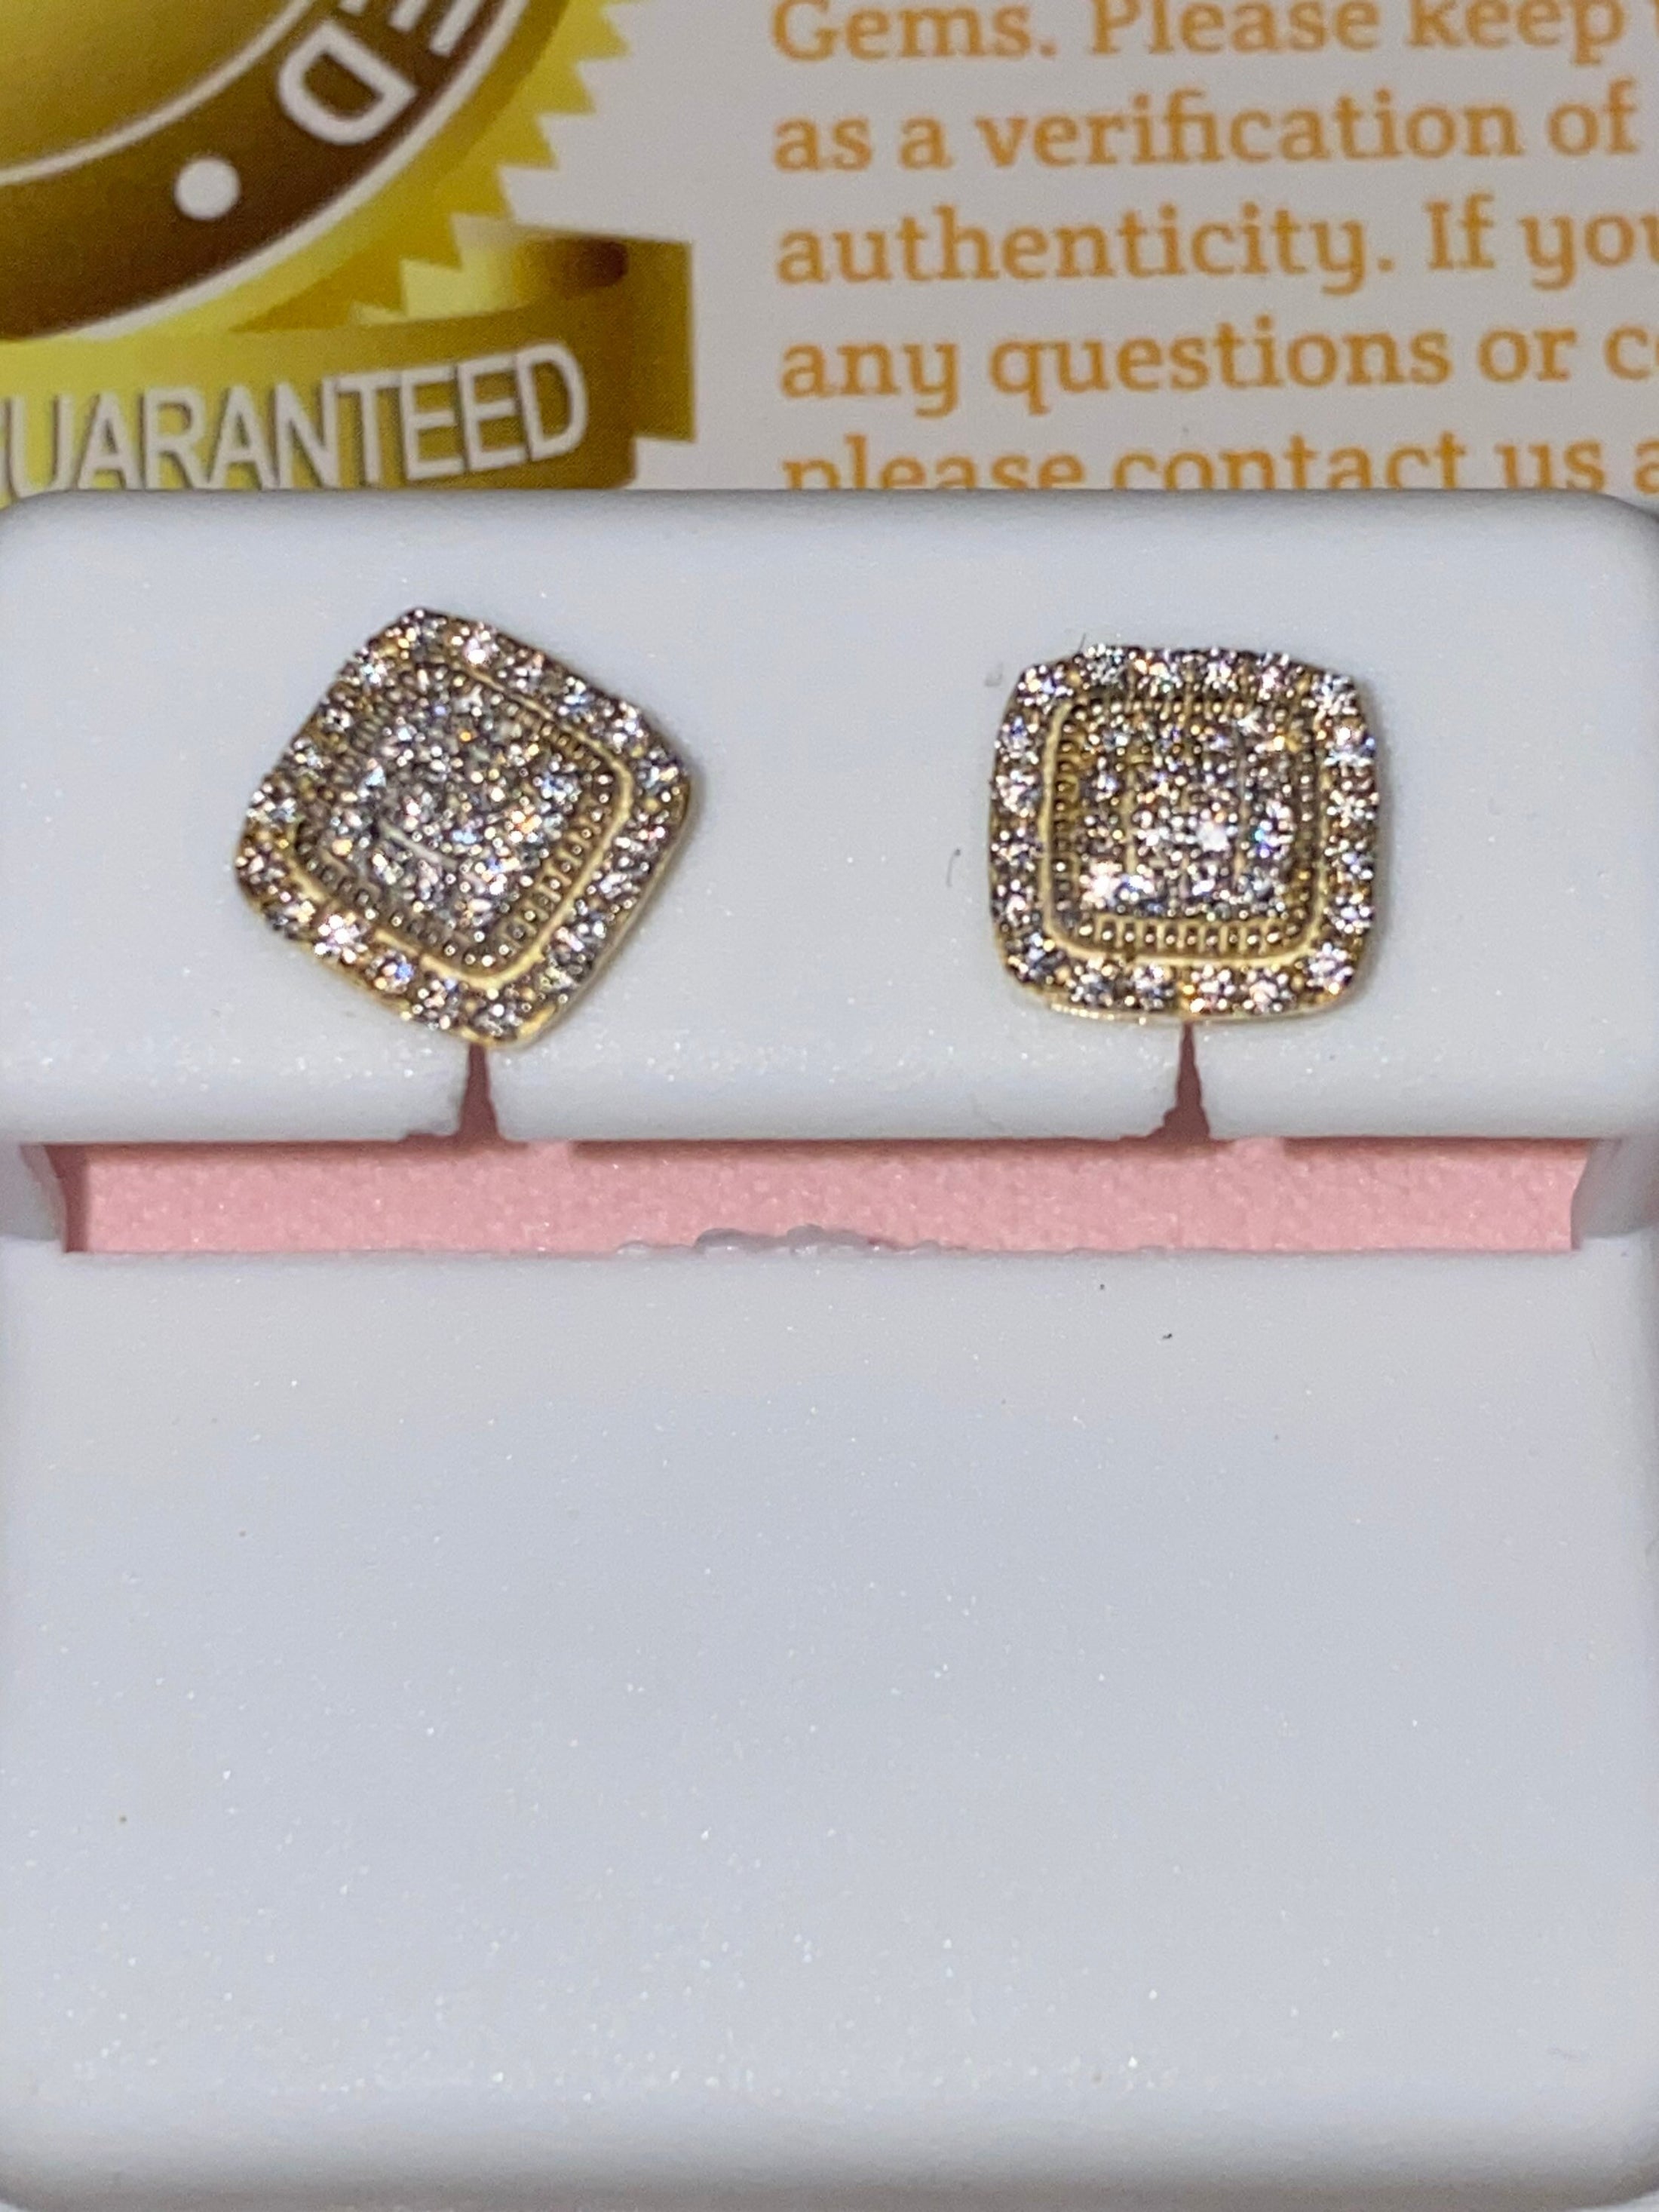 10k solid gold screw back earrings, Unisex Real Gold Studs, NOT plated, 1/2cttw GRA certified Moissanite diamonds, Passes all diamond tester